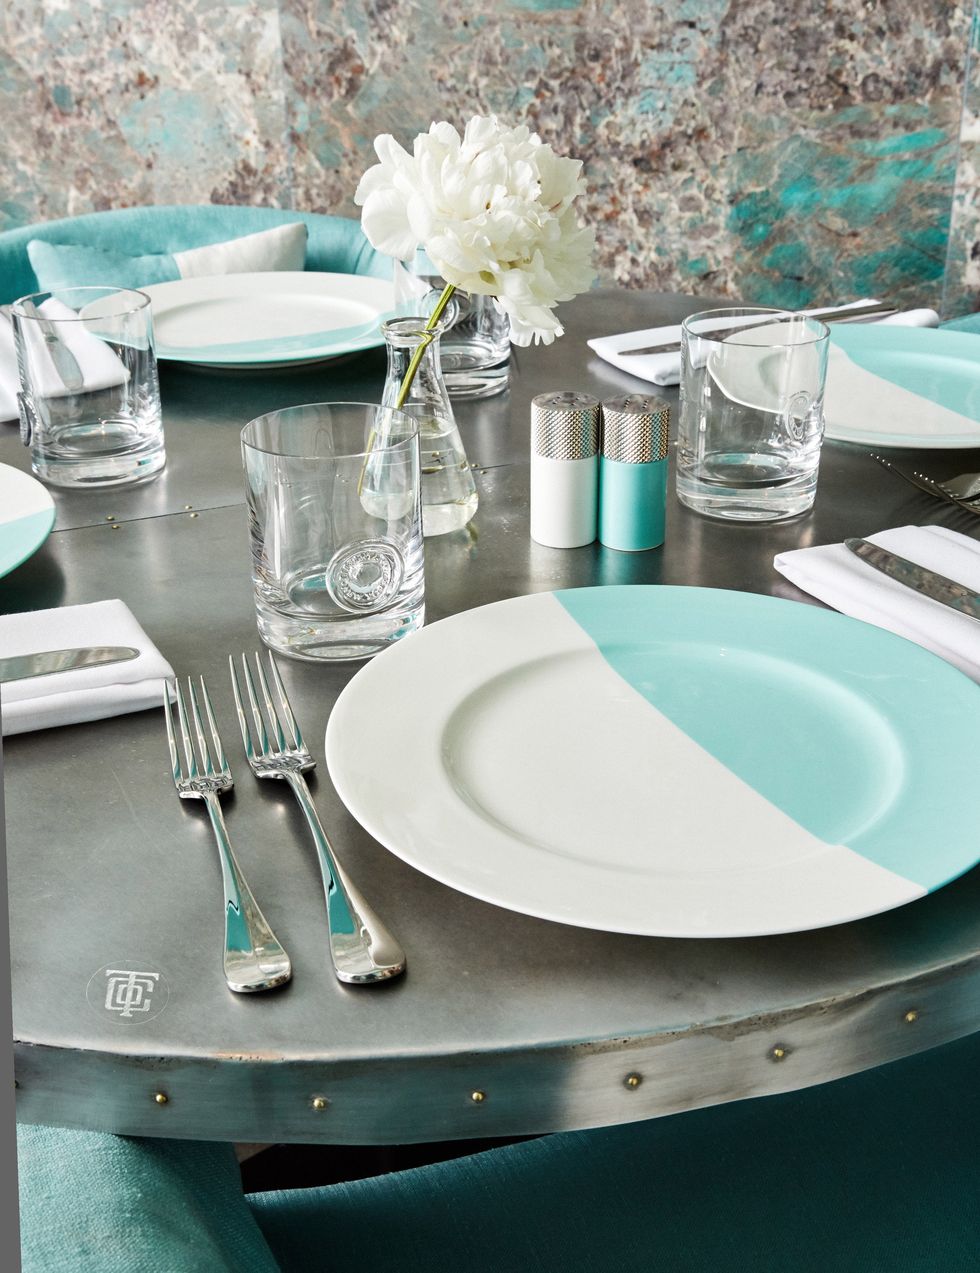 Blue, Aqua, Tablecloth, Turquoise, Green, Table, Turquoise, Teal, Dishware, Placemat, 